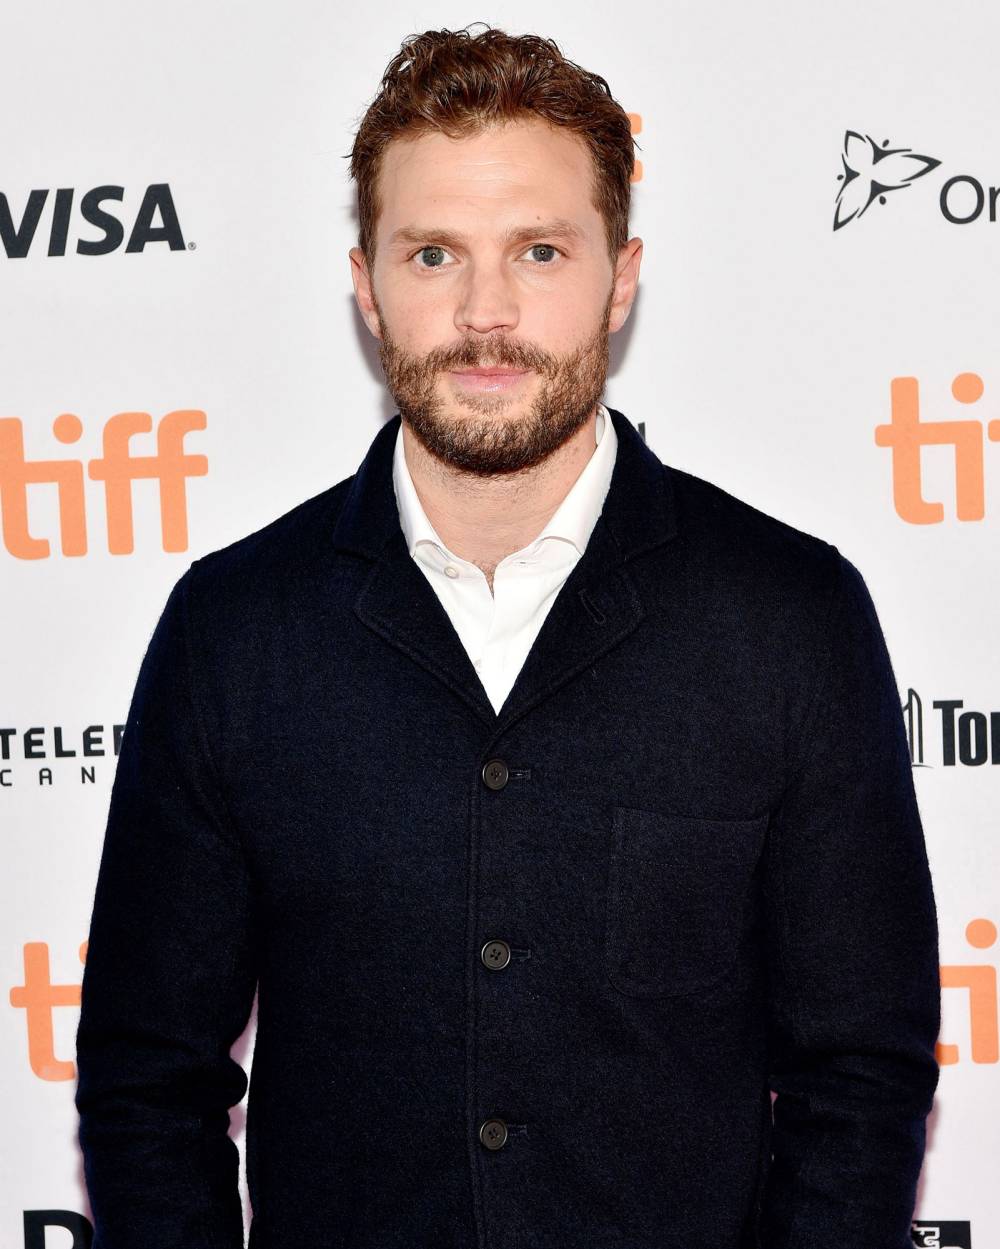 Say What? Jamie Dornan Was Almost a Reality TV Star Before Becoming an Actor